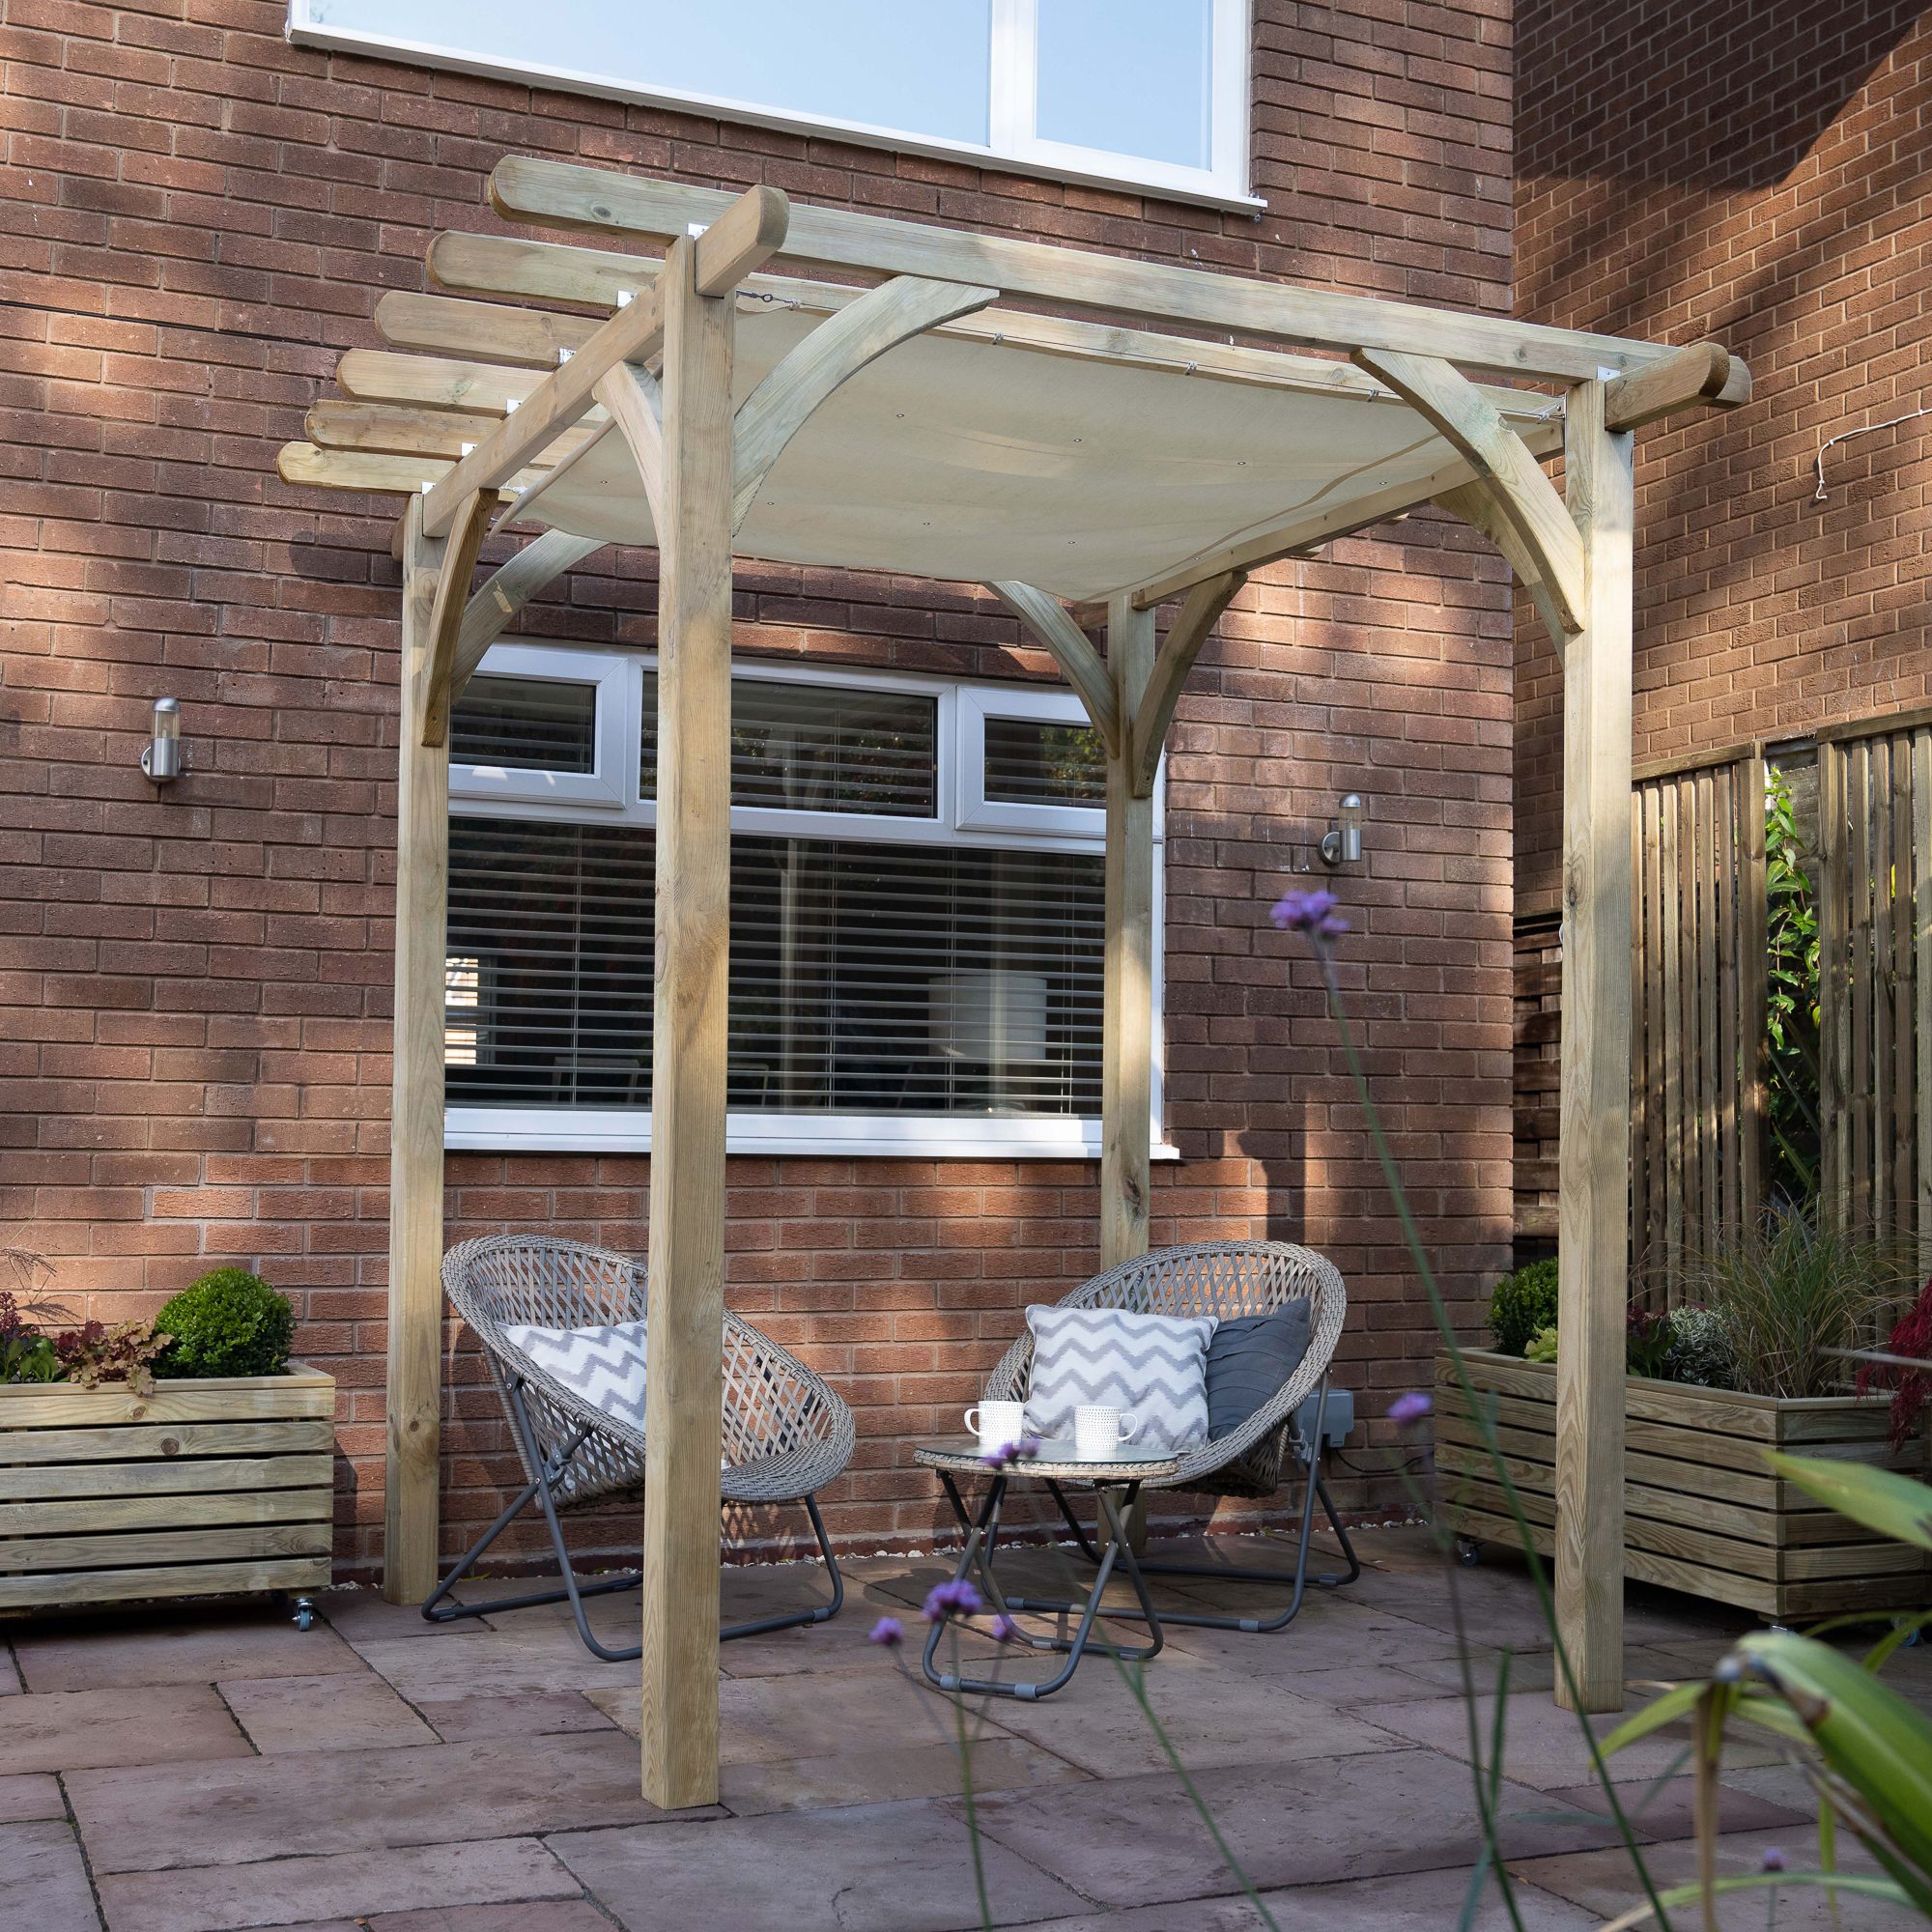 Forest Garden Ultima Cream Pergola & decking kit, x4 Post (H) 2.4m x (W) 2.4m - Canopy included